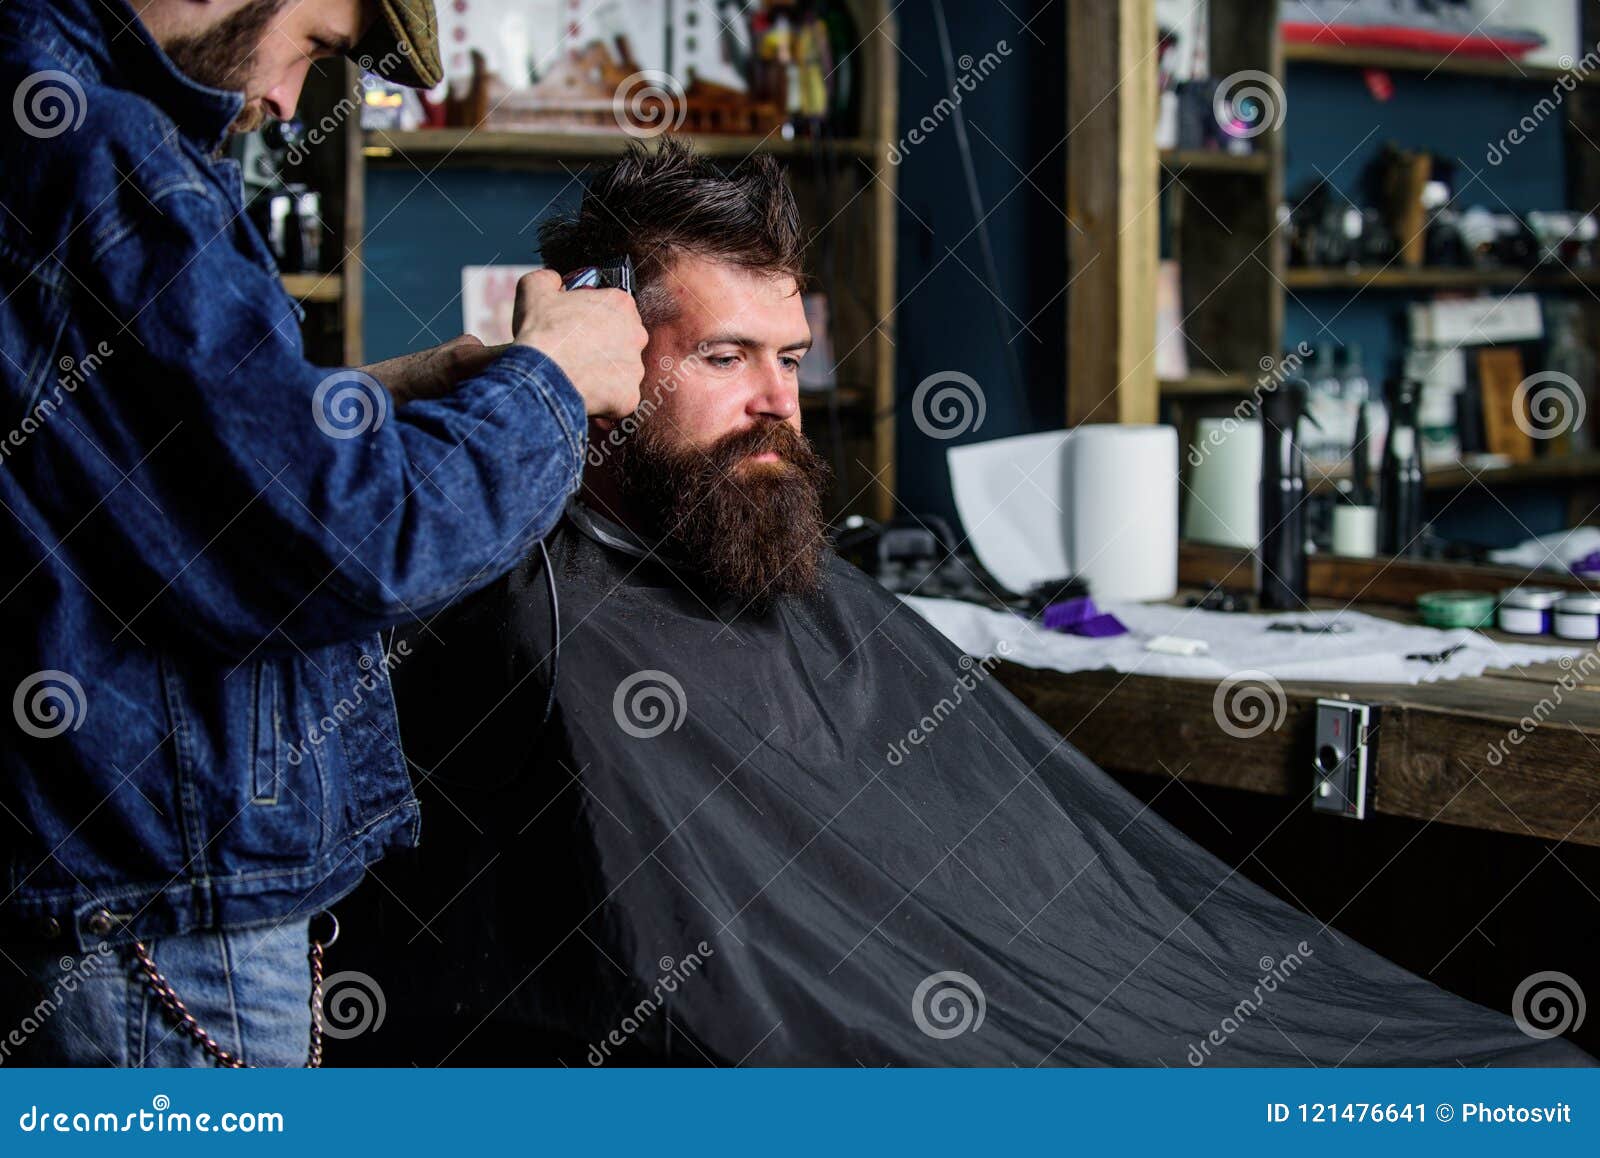 Hipster Lifestyle Concept. Hipster Client Getting Haircut Stock Image ...